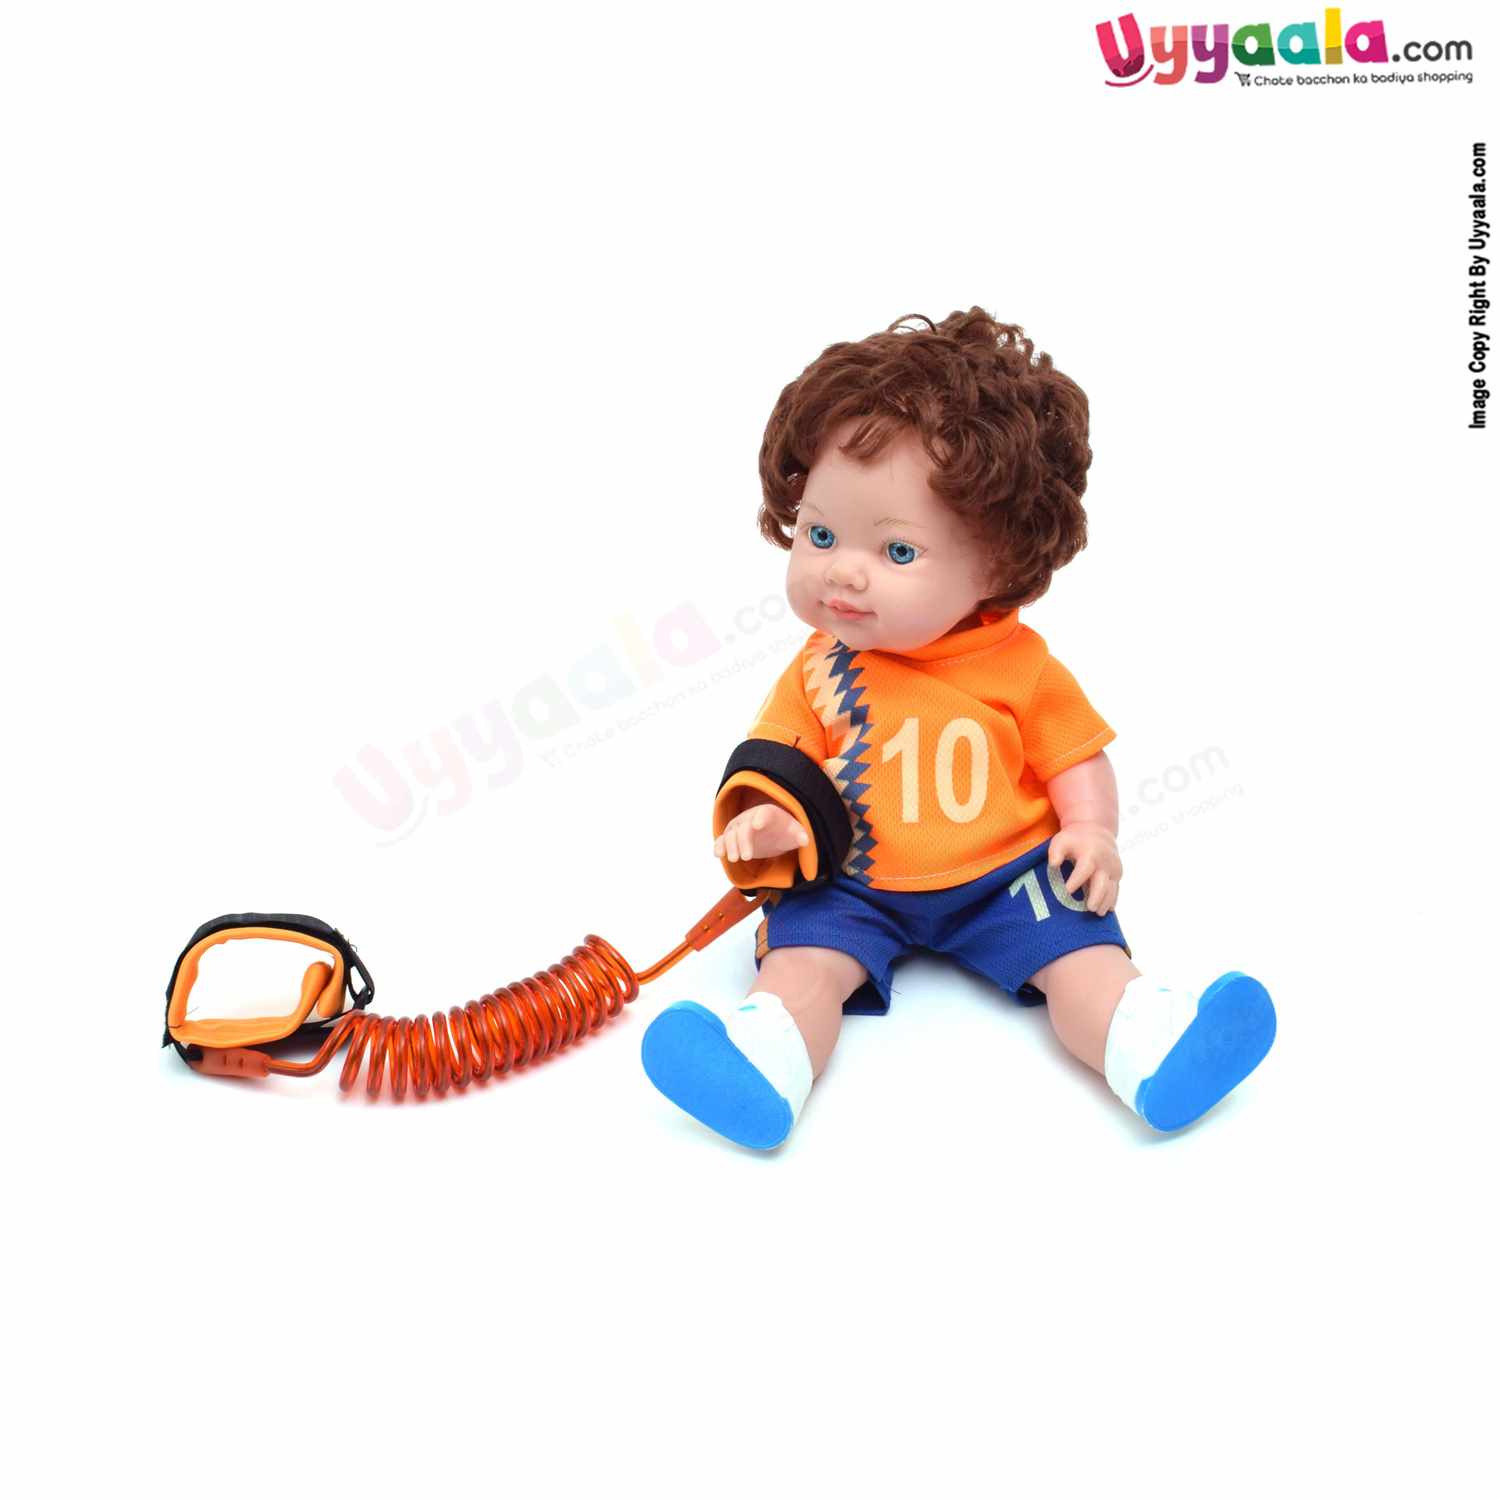 Child Safety Anti-Lost Wrist Link Belt with flexible 360° rotation to keep an Eye on your Child - Orange